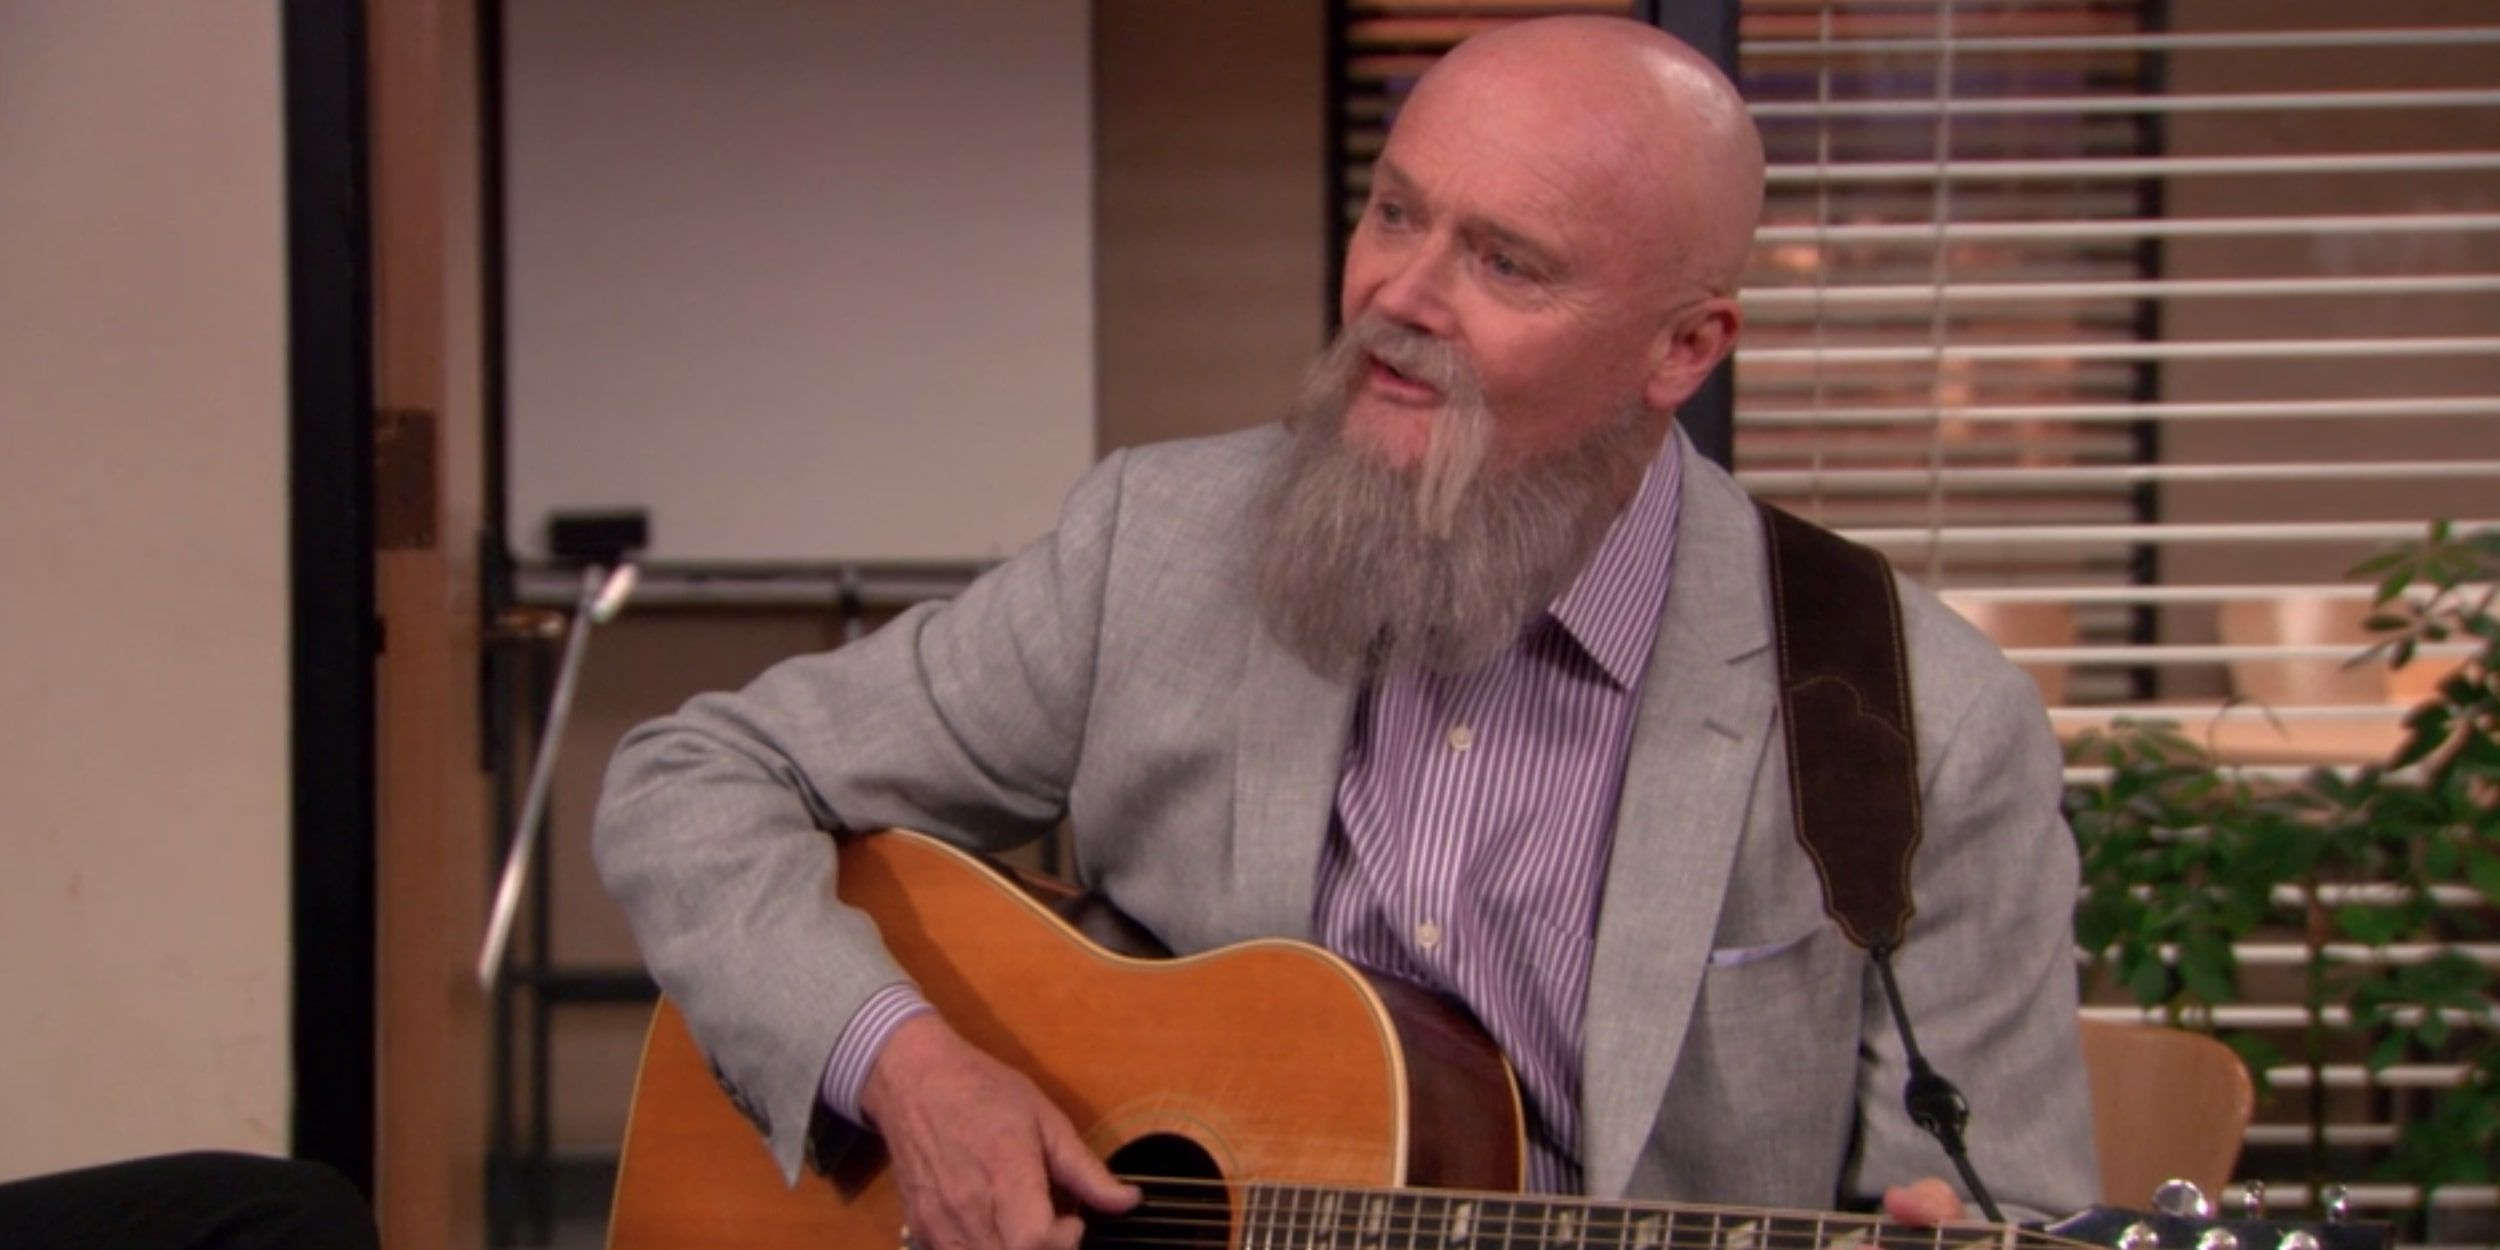 Creed Bratton playing guitar on The Office